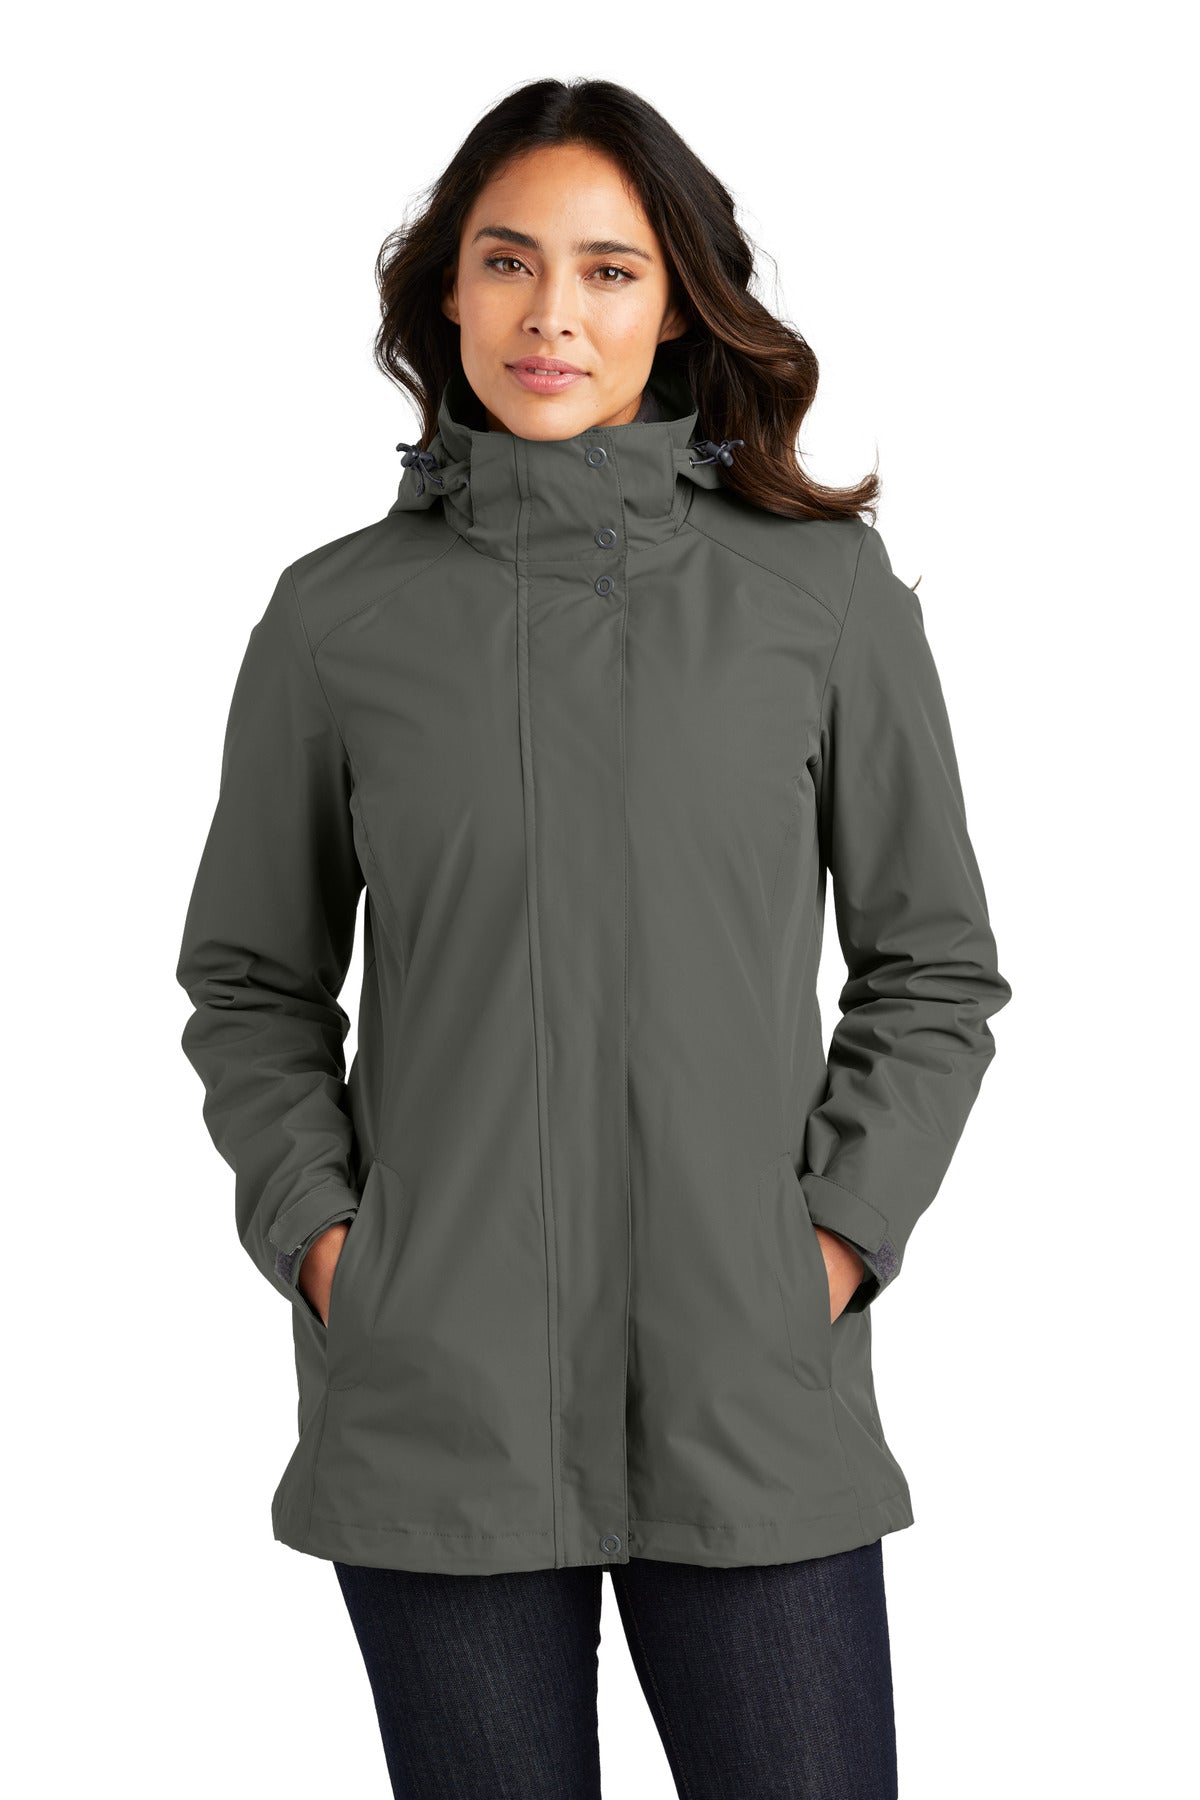 Port Authority® Ladies All-Weather 3-in-1 Jacket L123